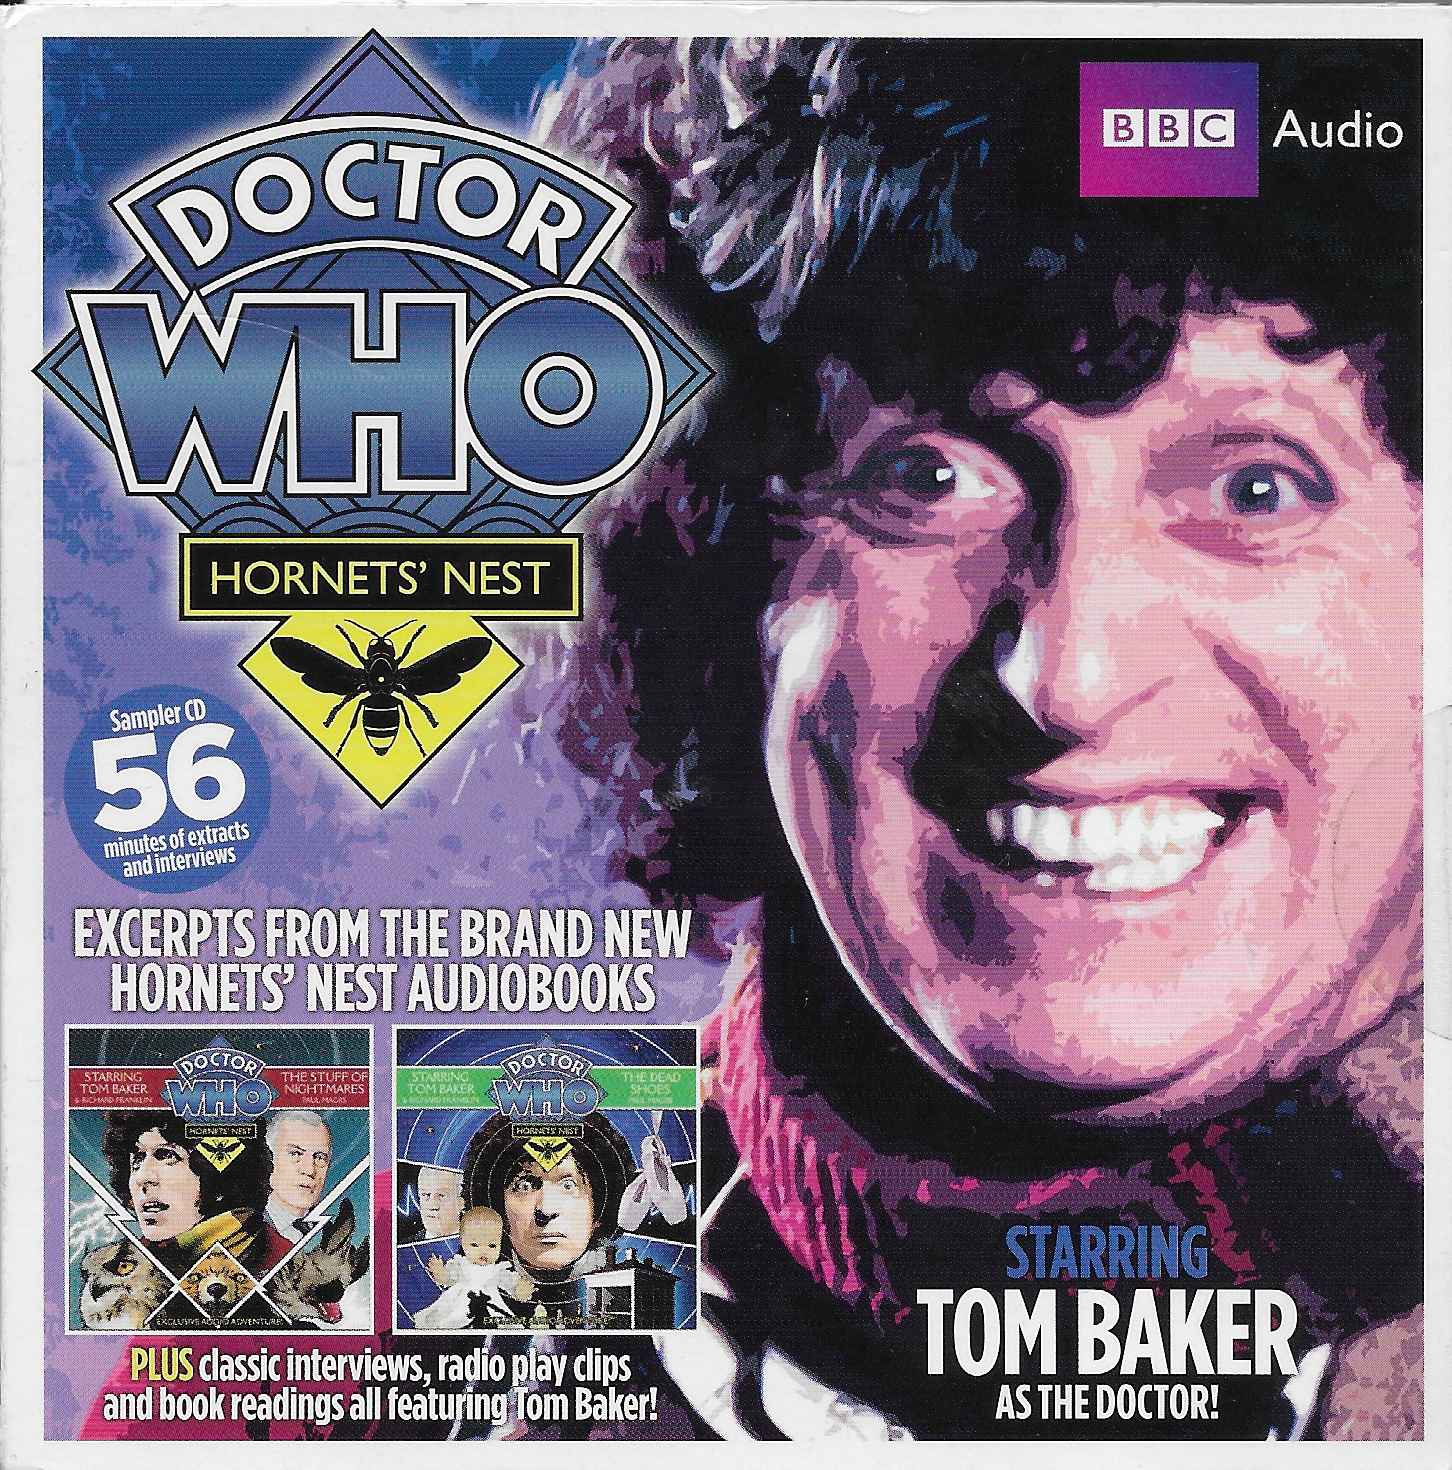 Picture of Doctor Who - Tom Baker by artist Various from the BBC cds - Records and Tapes library